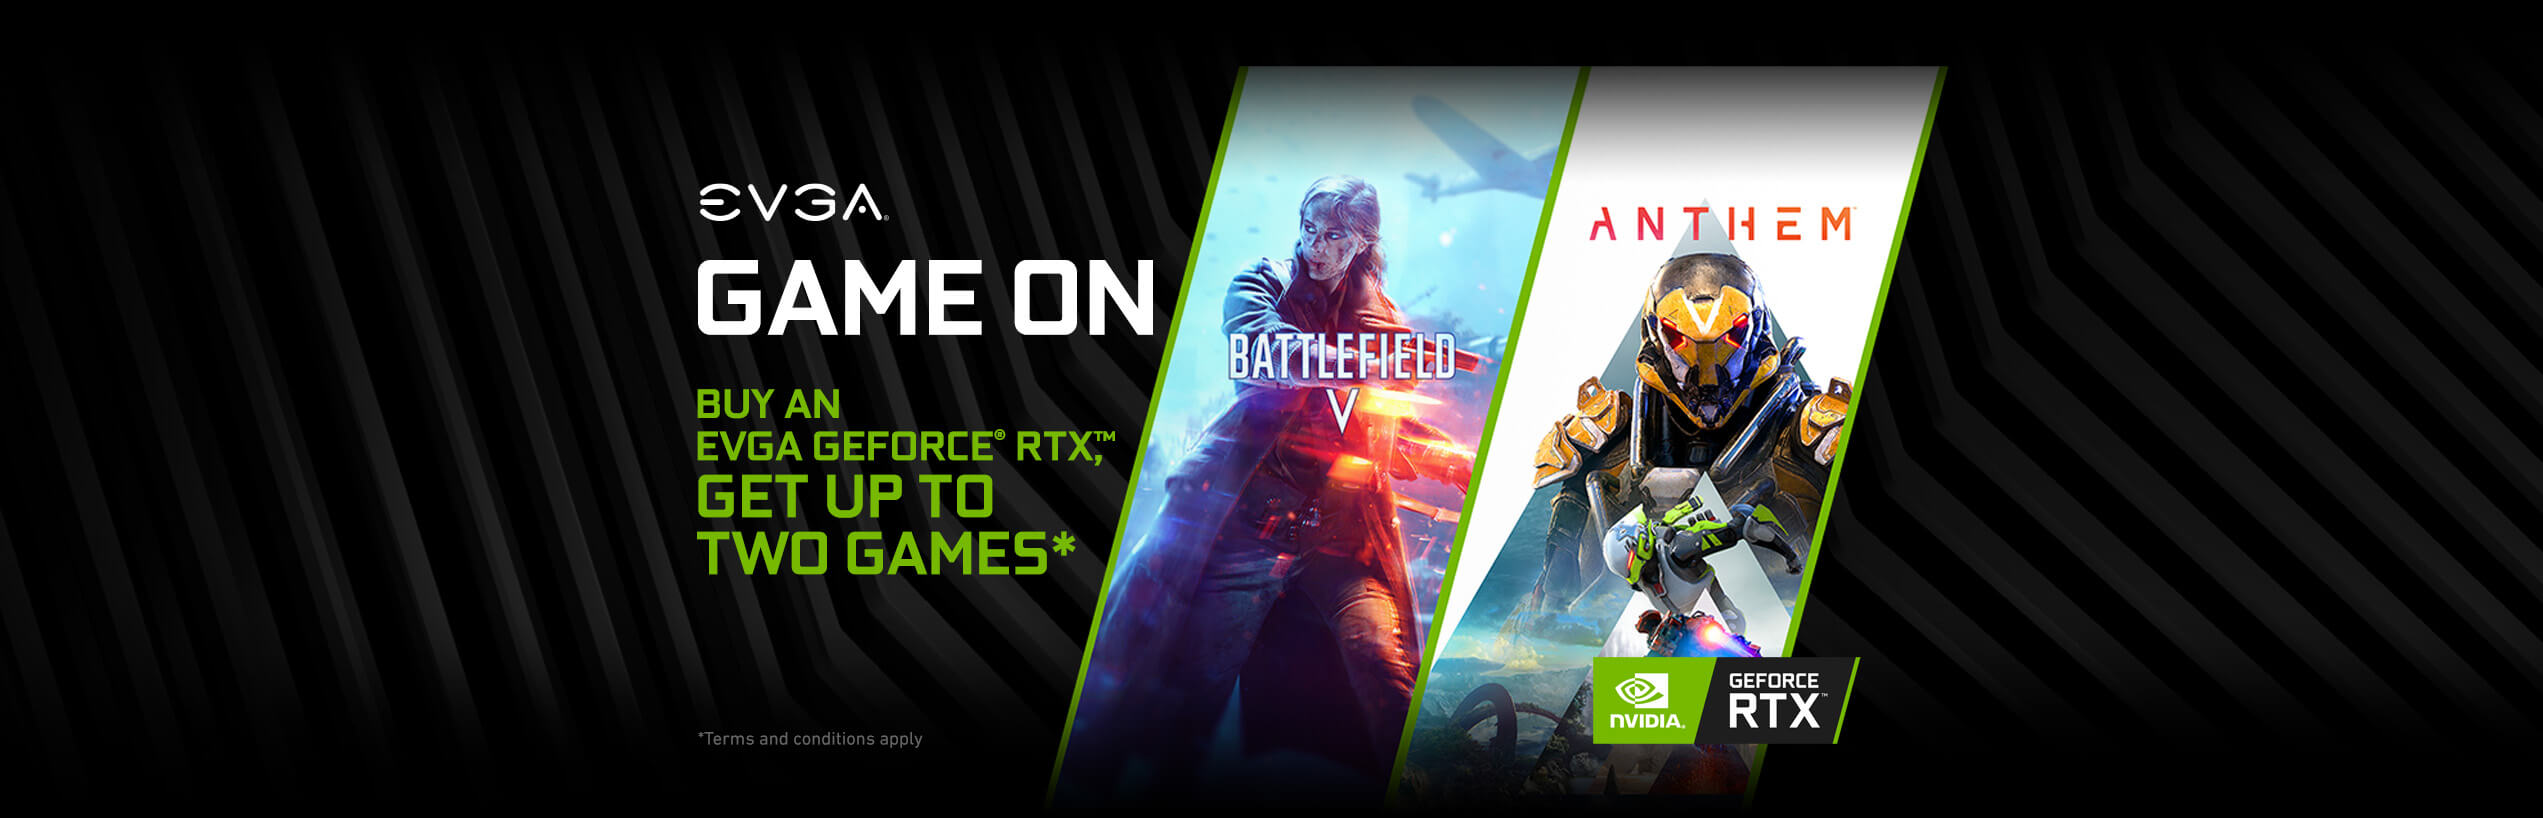 Buy EVGA GeForce RTX, Get Up To Two Games*